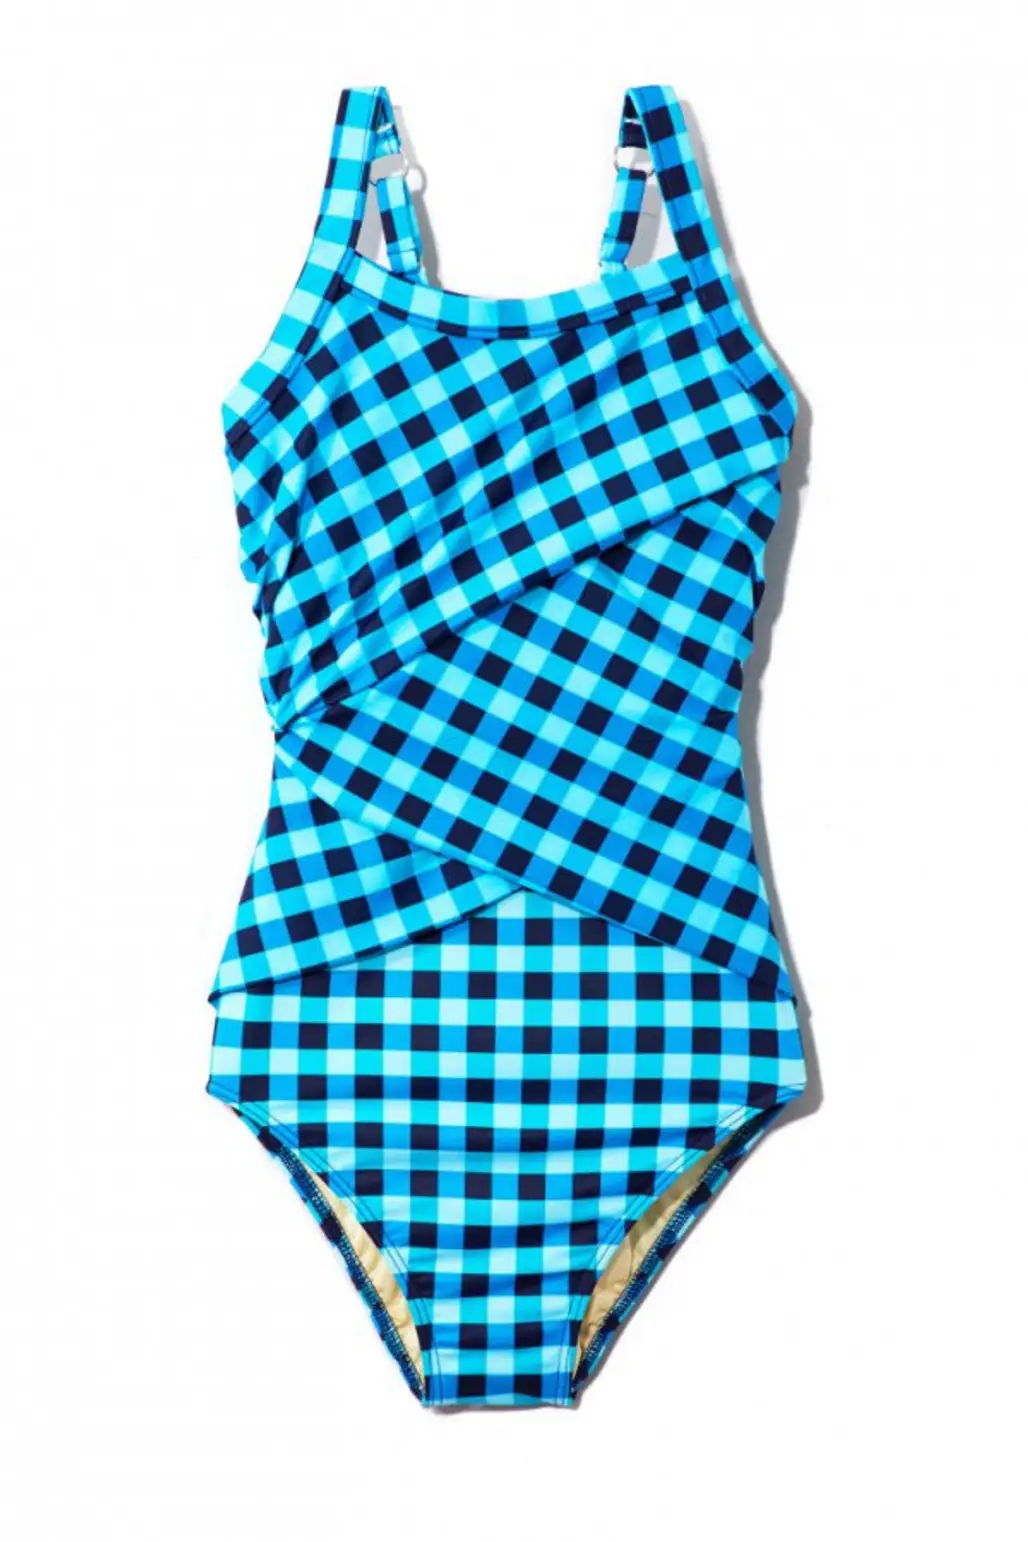 swimwear, one piece swimsuit, clothing, product, maillot,